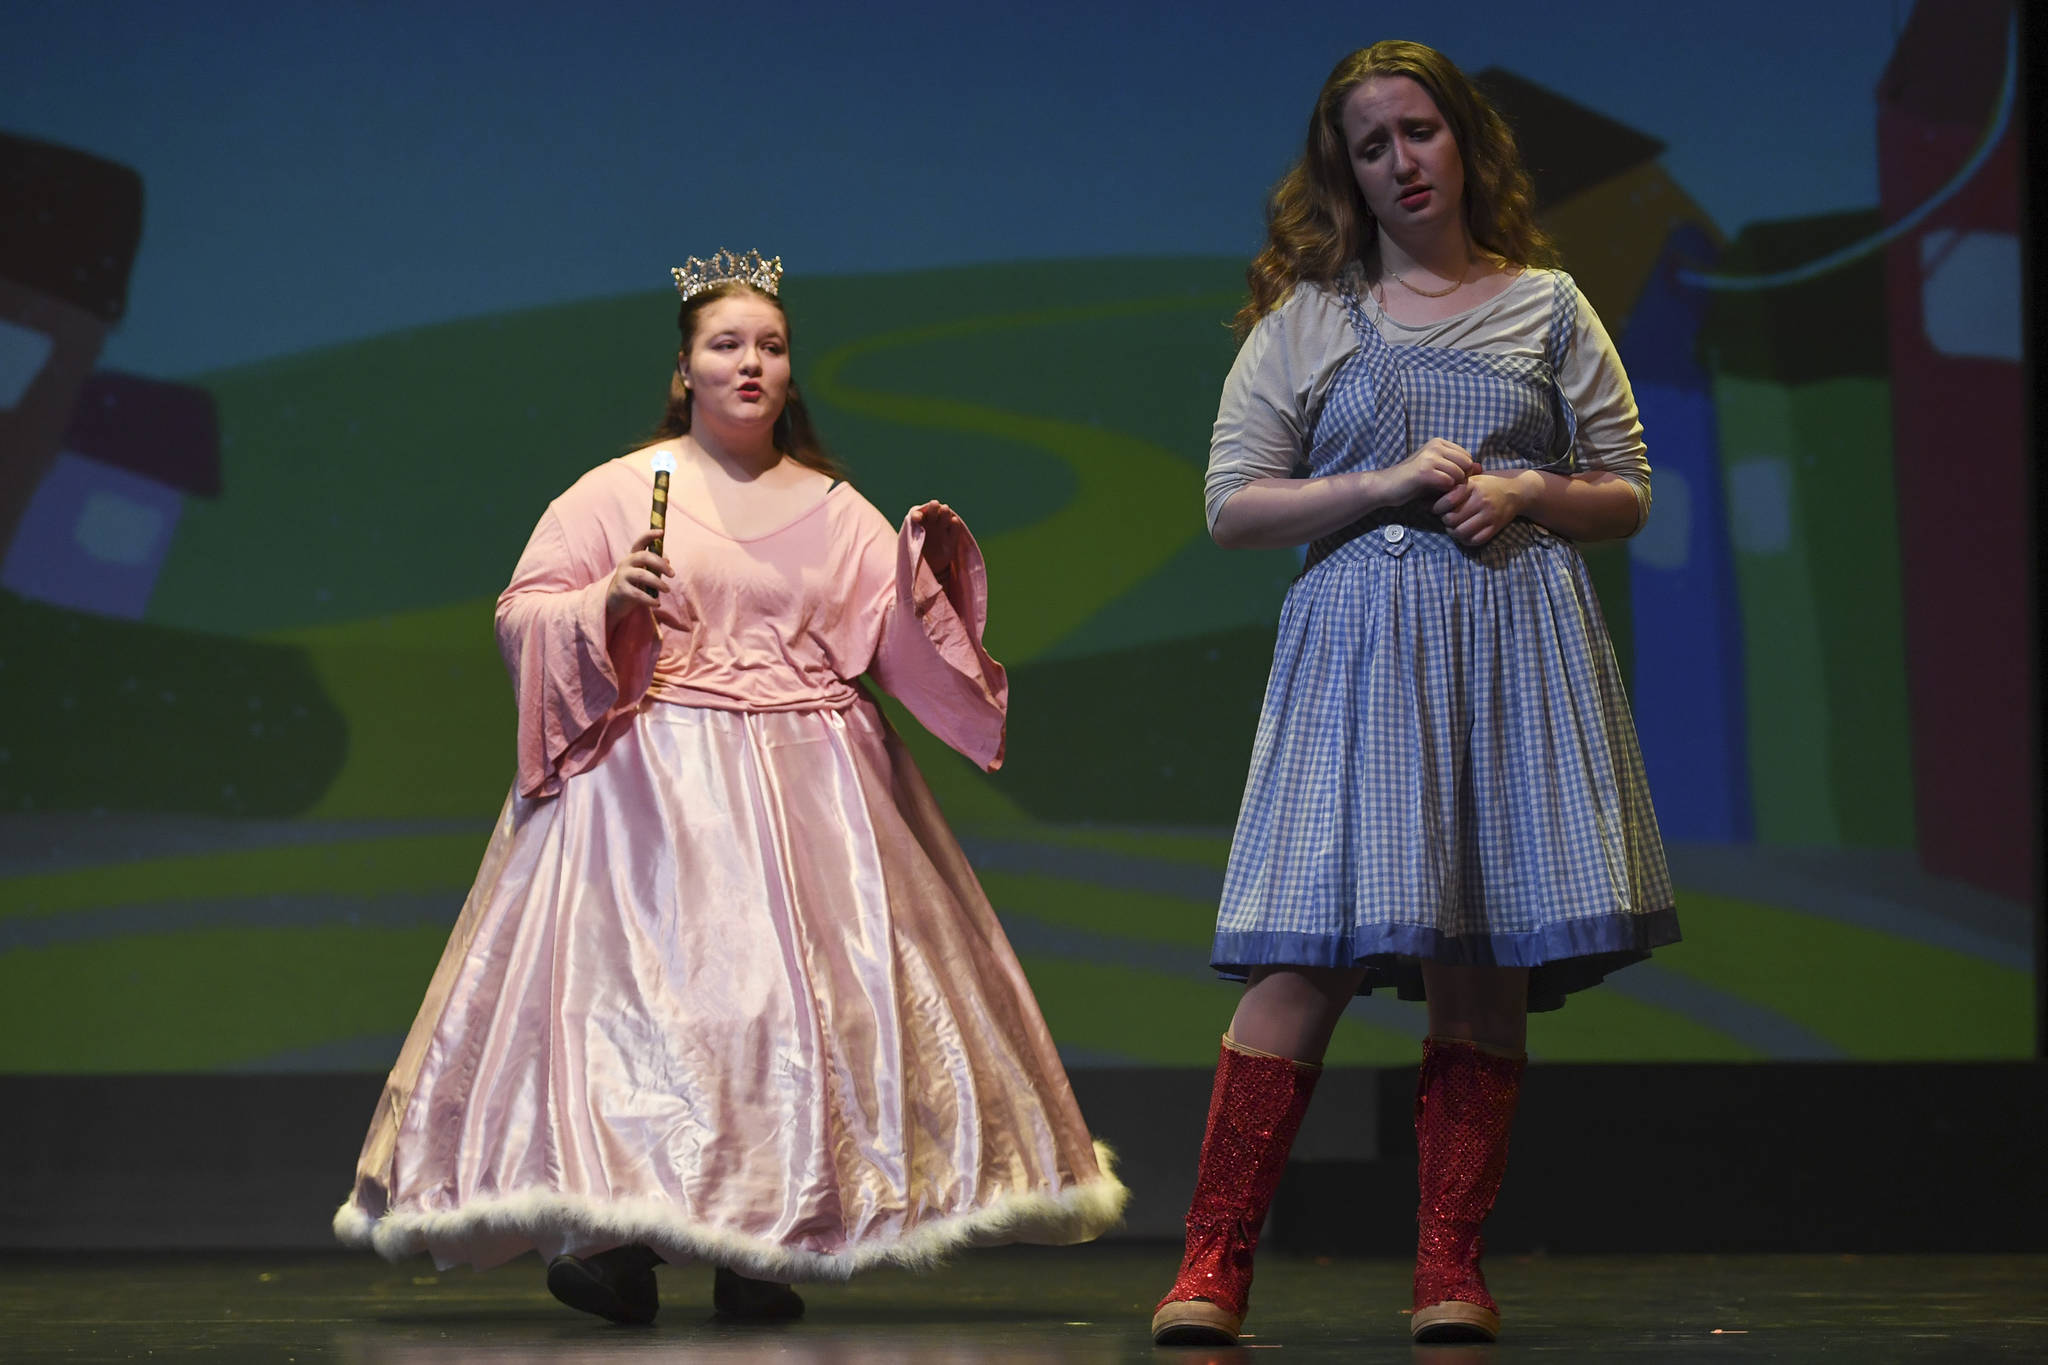 Glinda the Good Witch, played by Nicole Yancey, left, and Dorothy Gale, played by Devin Moorehead, perform during rehearsal for the Thunder Mountain High School production of “Choose Your Own Oz” at TMHS on Friday, Nov. 8, 2019. (Michael Penn | Juneau Empire)